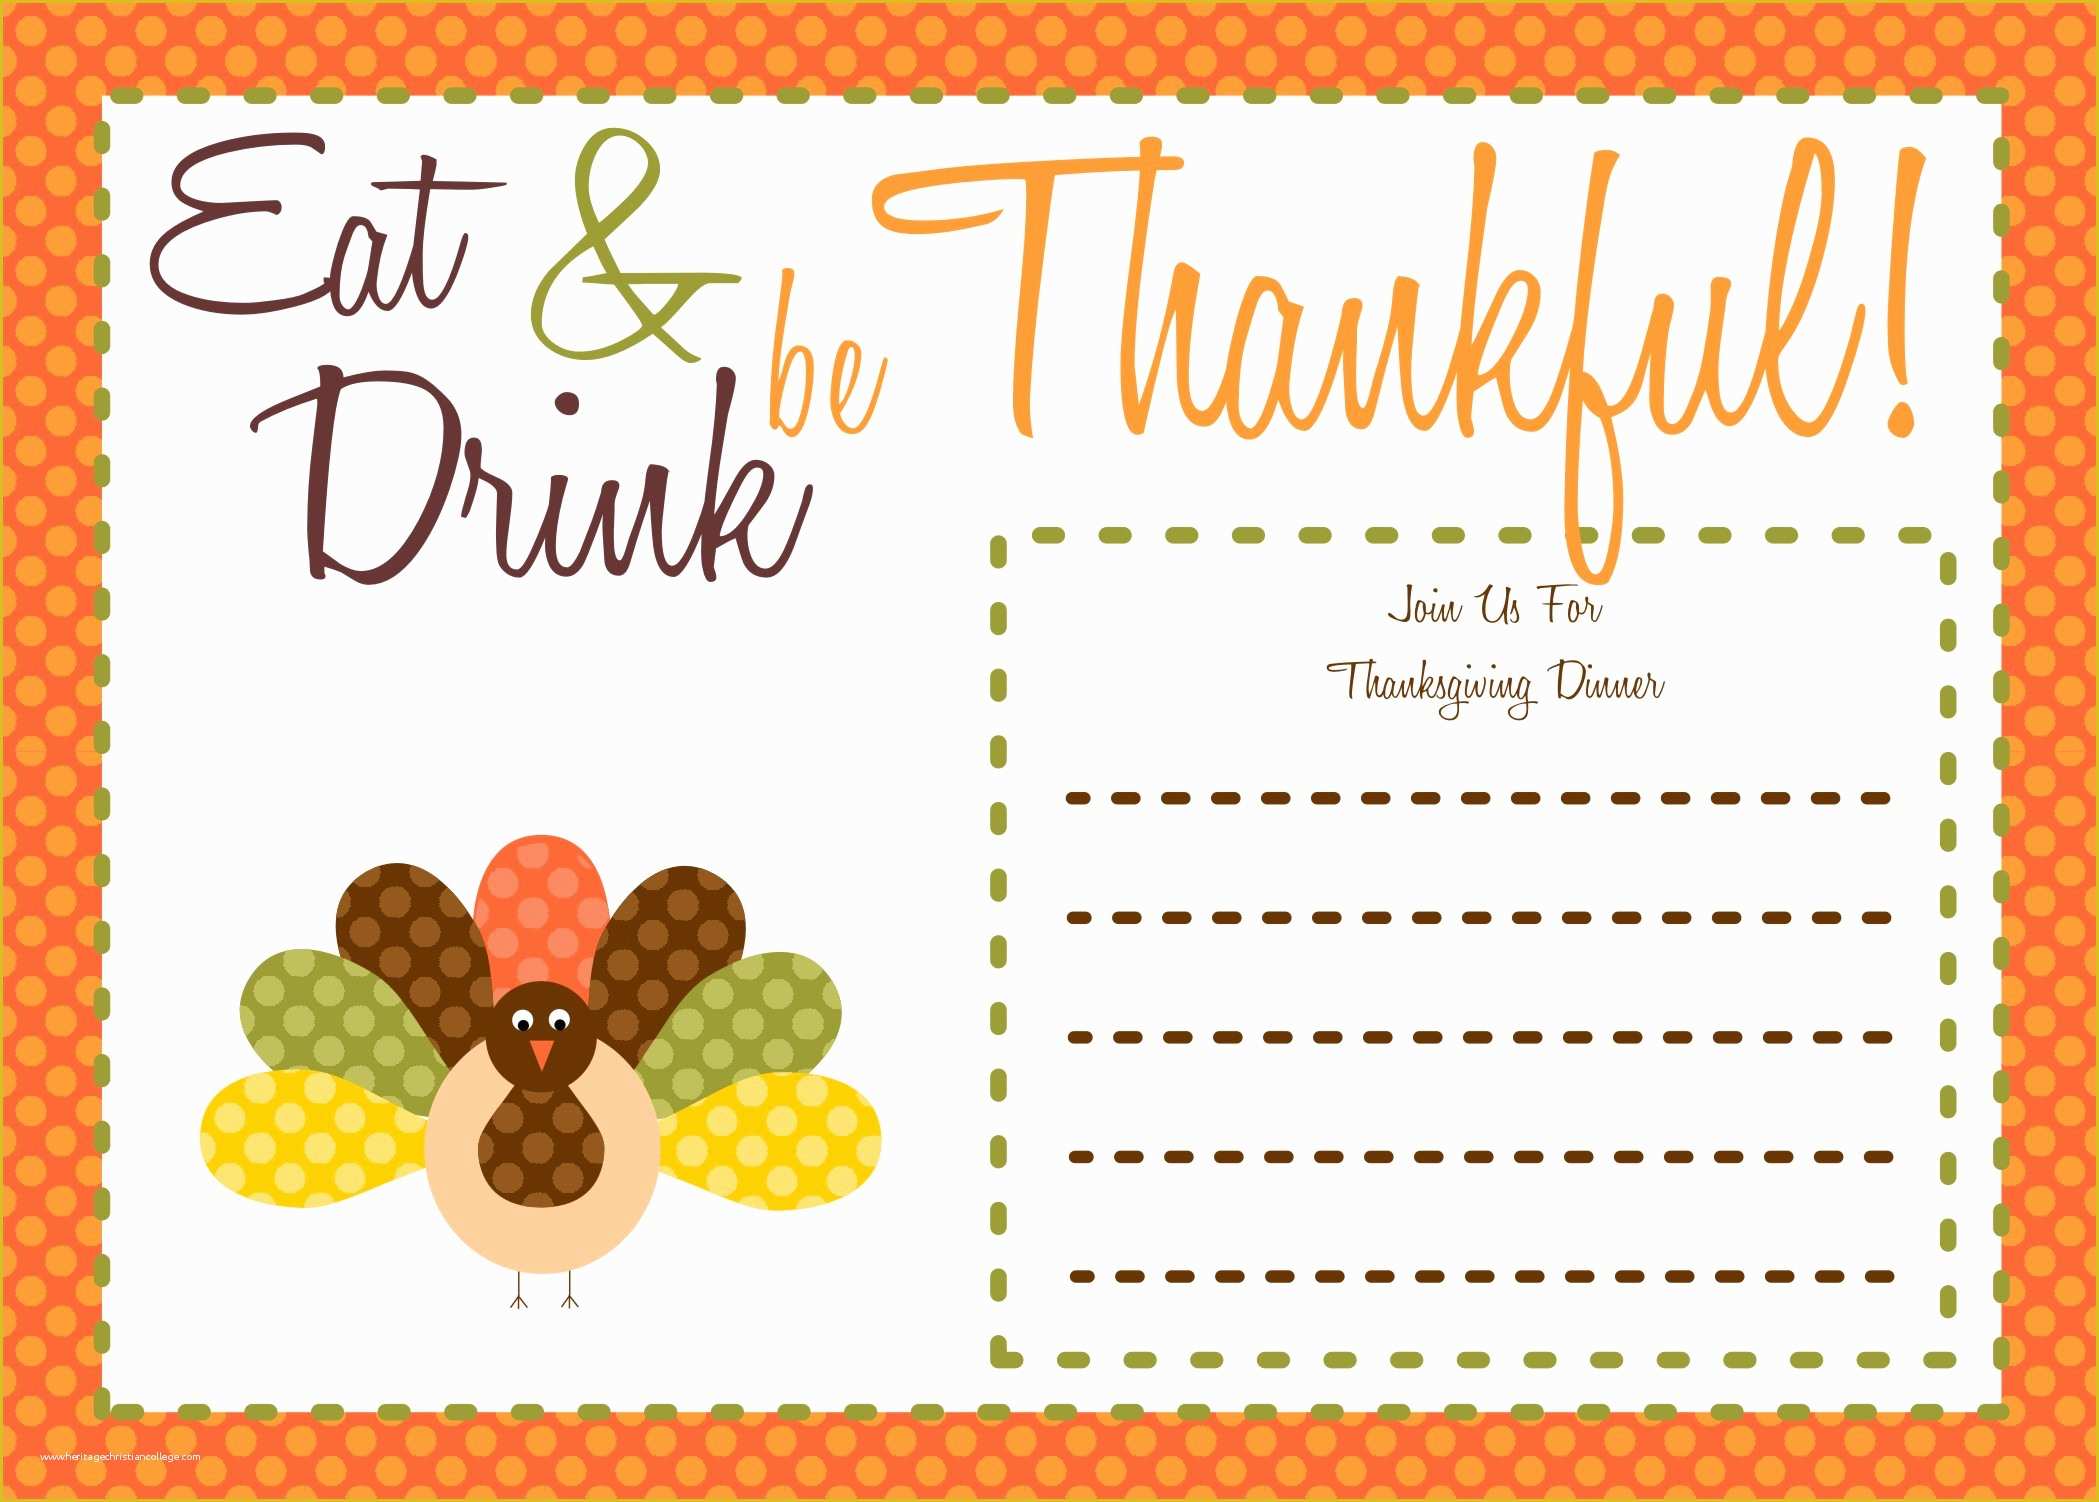 Free Thanksgiving Invitation Templates Of Free Thanksgiving Printables From the Party Bakery